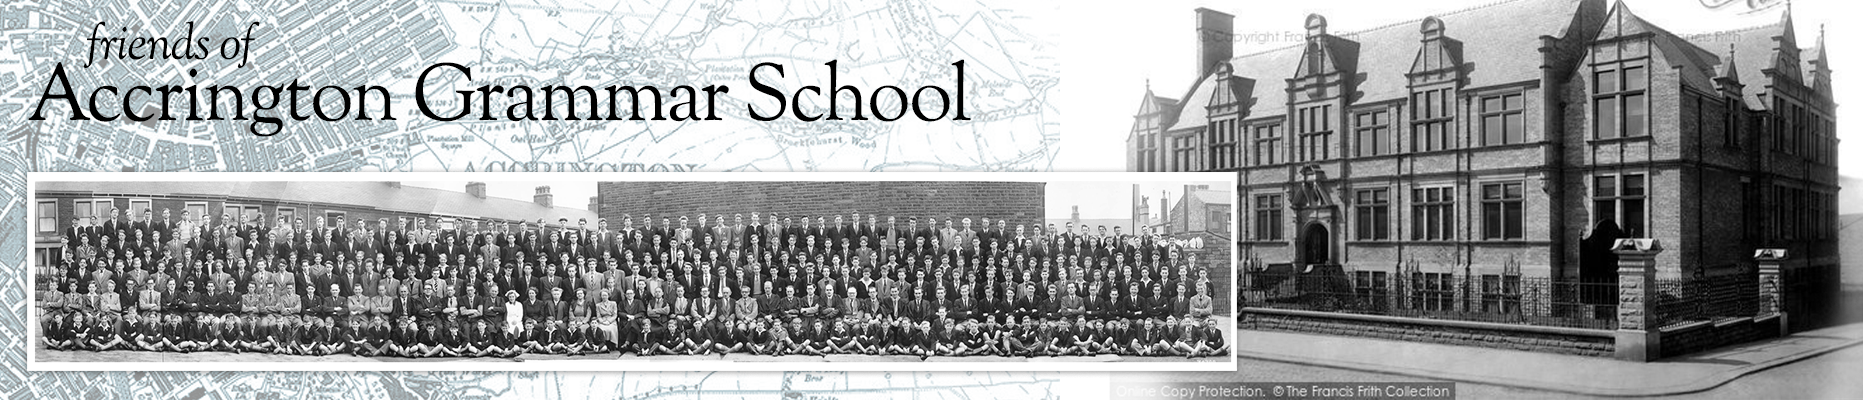 Montage of the School and Pupils